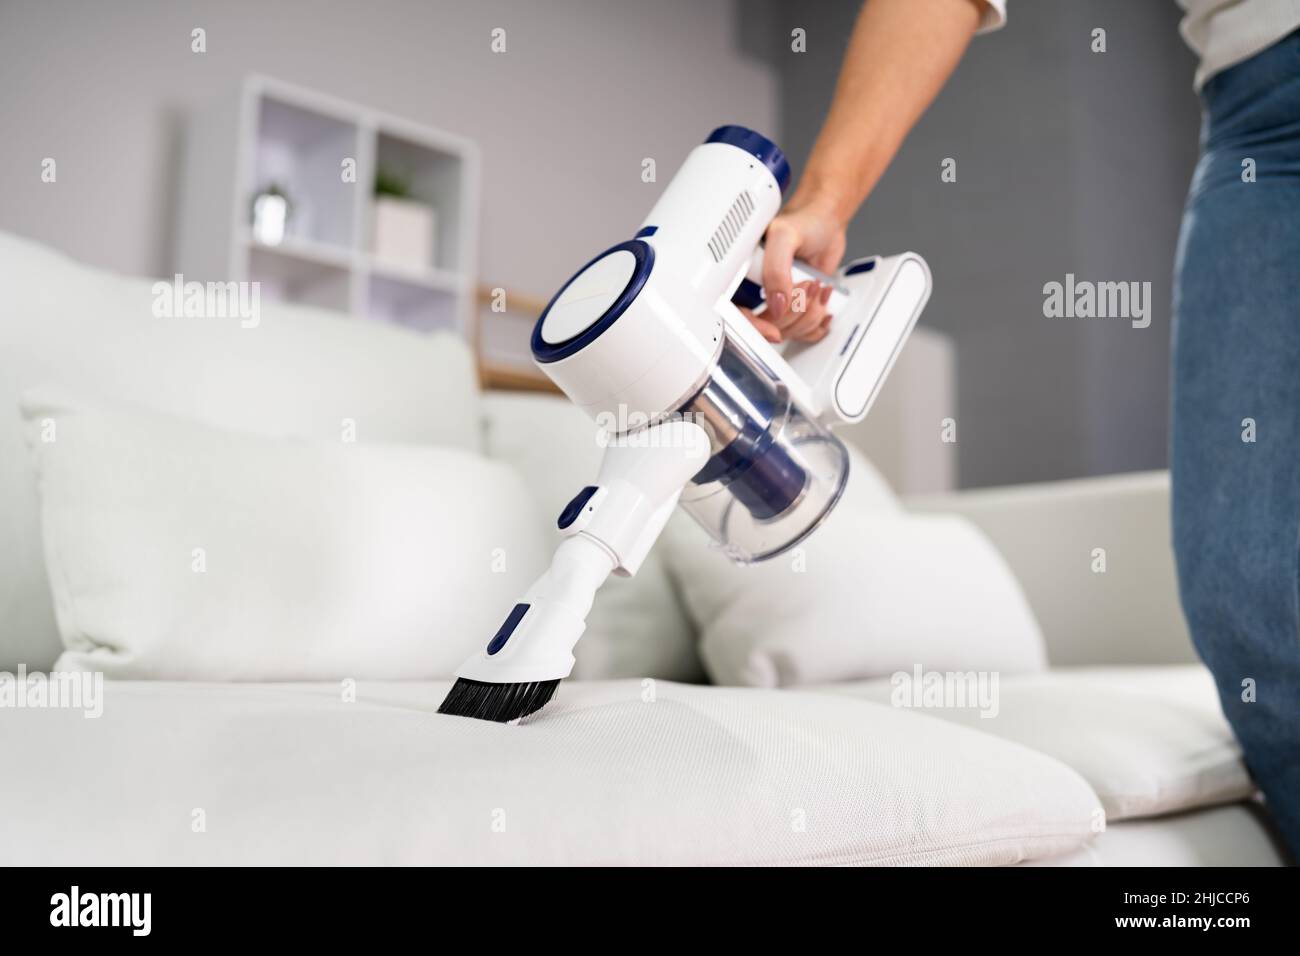 Young Female Worker Cleaning Sofa With Vacuum Cleaner Stock Photo